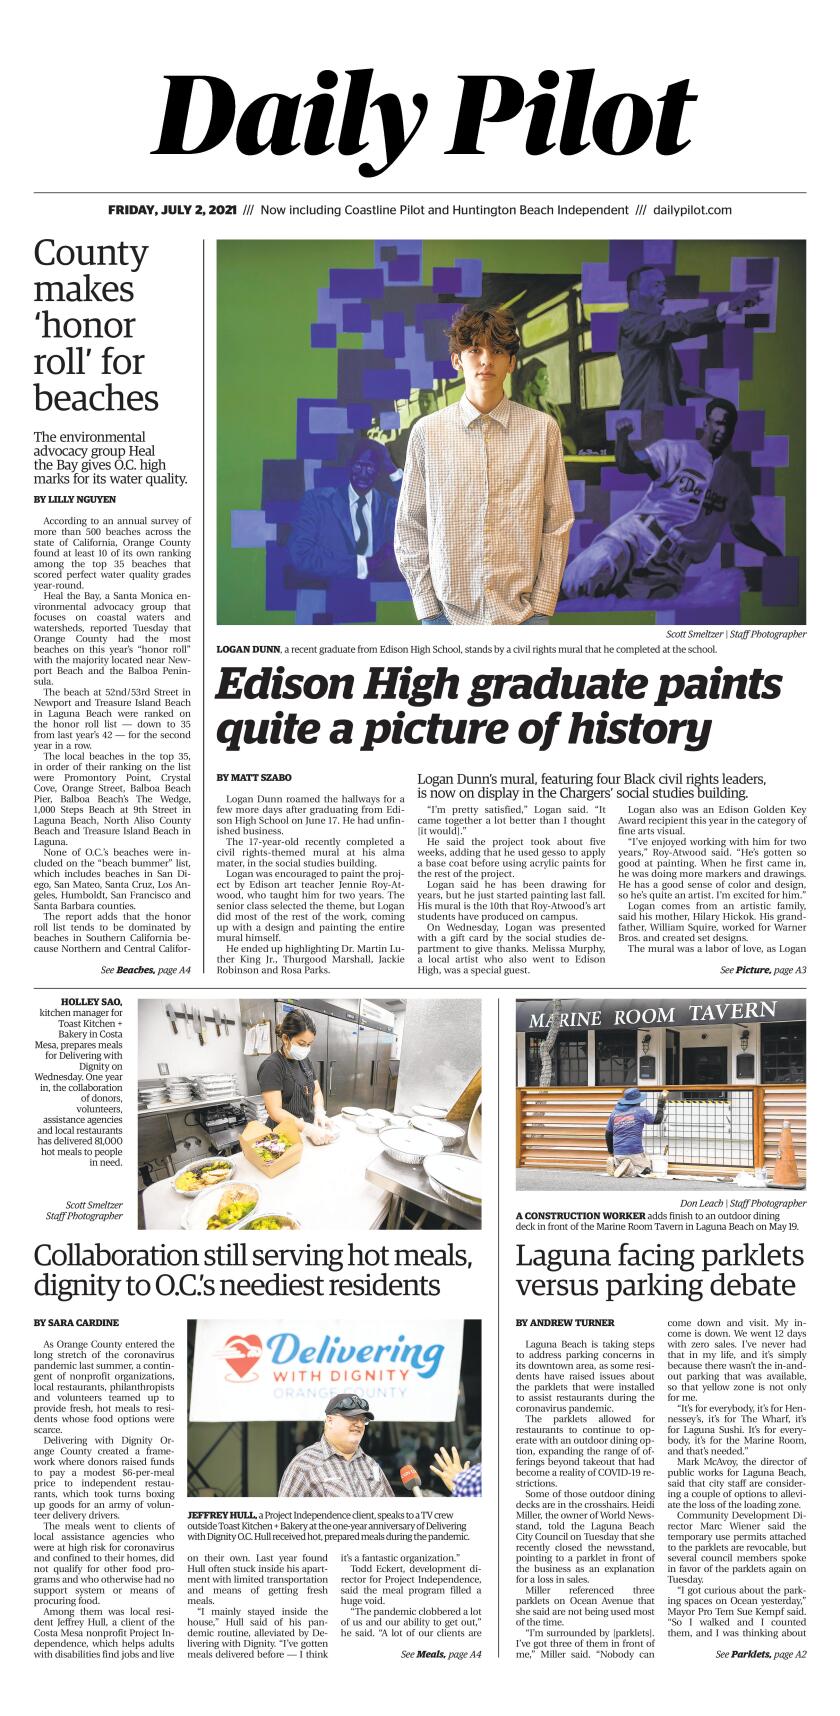 Daily Pilot E Newspaper Friday July 2 21 Los Angeles Times